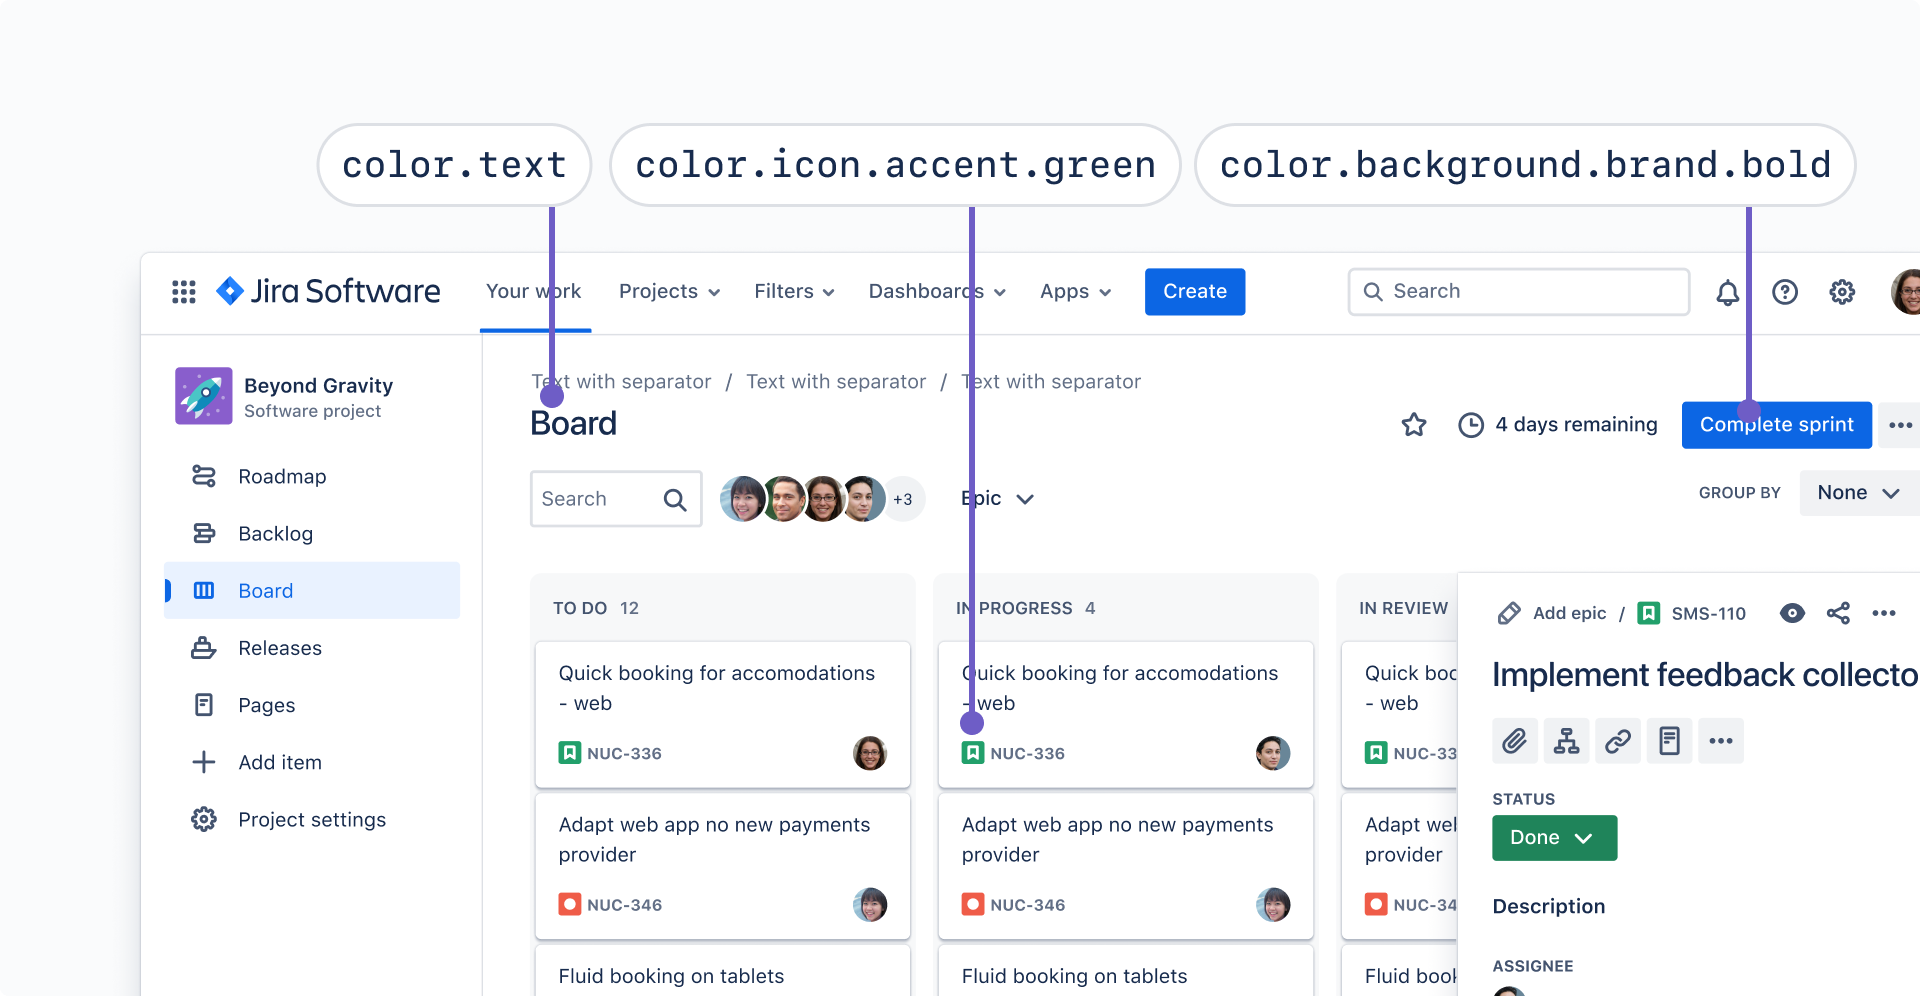 Screenshot of a Jira board mapped to different token examples. The board title uses “color.text”, task icon uses “color.icon.accent.green”, and the button background uses “color.background.brand.bold.”